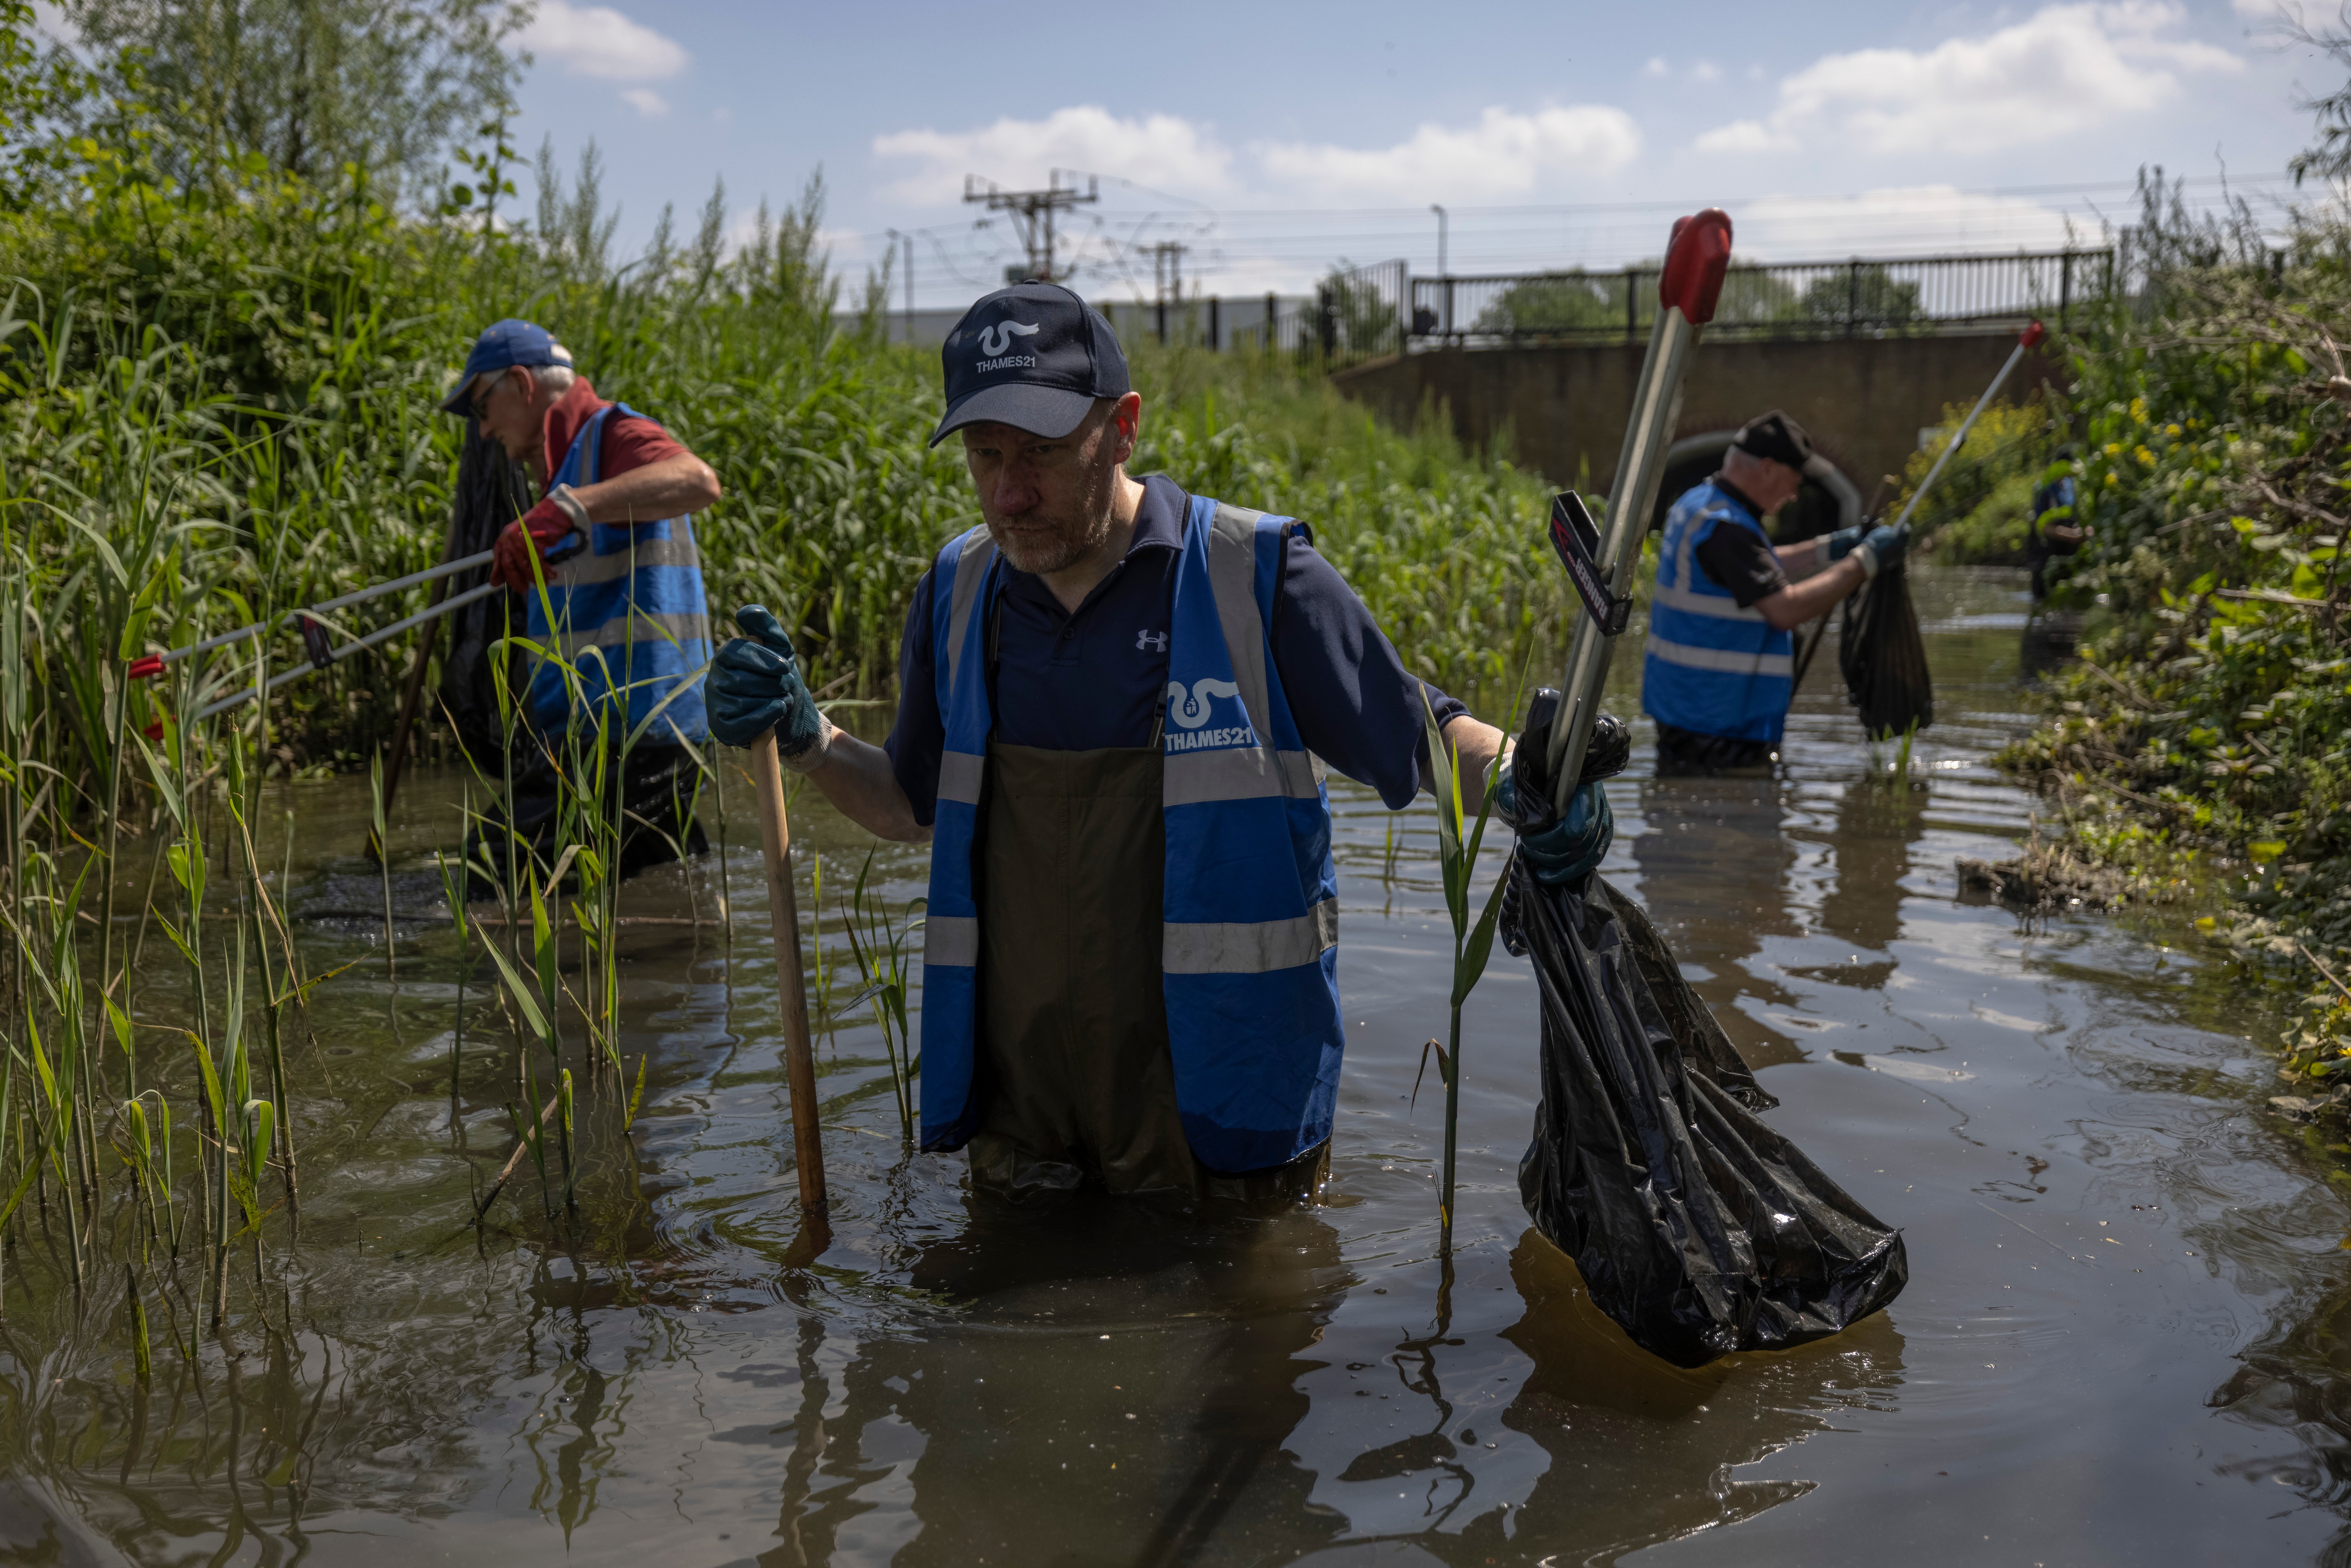 Volunteers on a river clean-up to remove litter and invasive plants in London